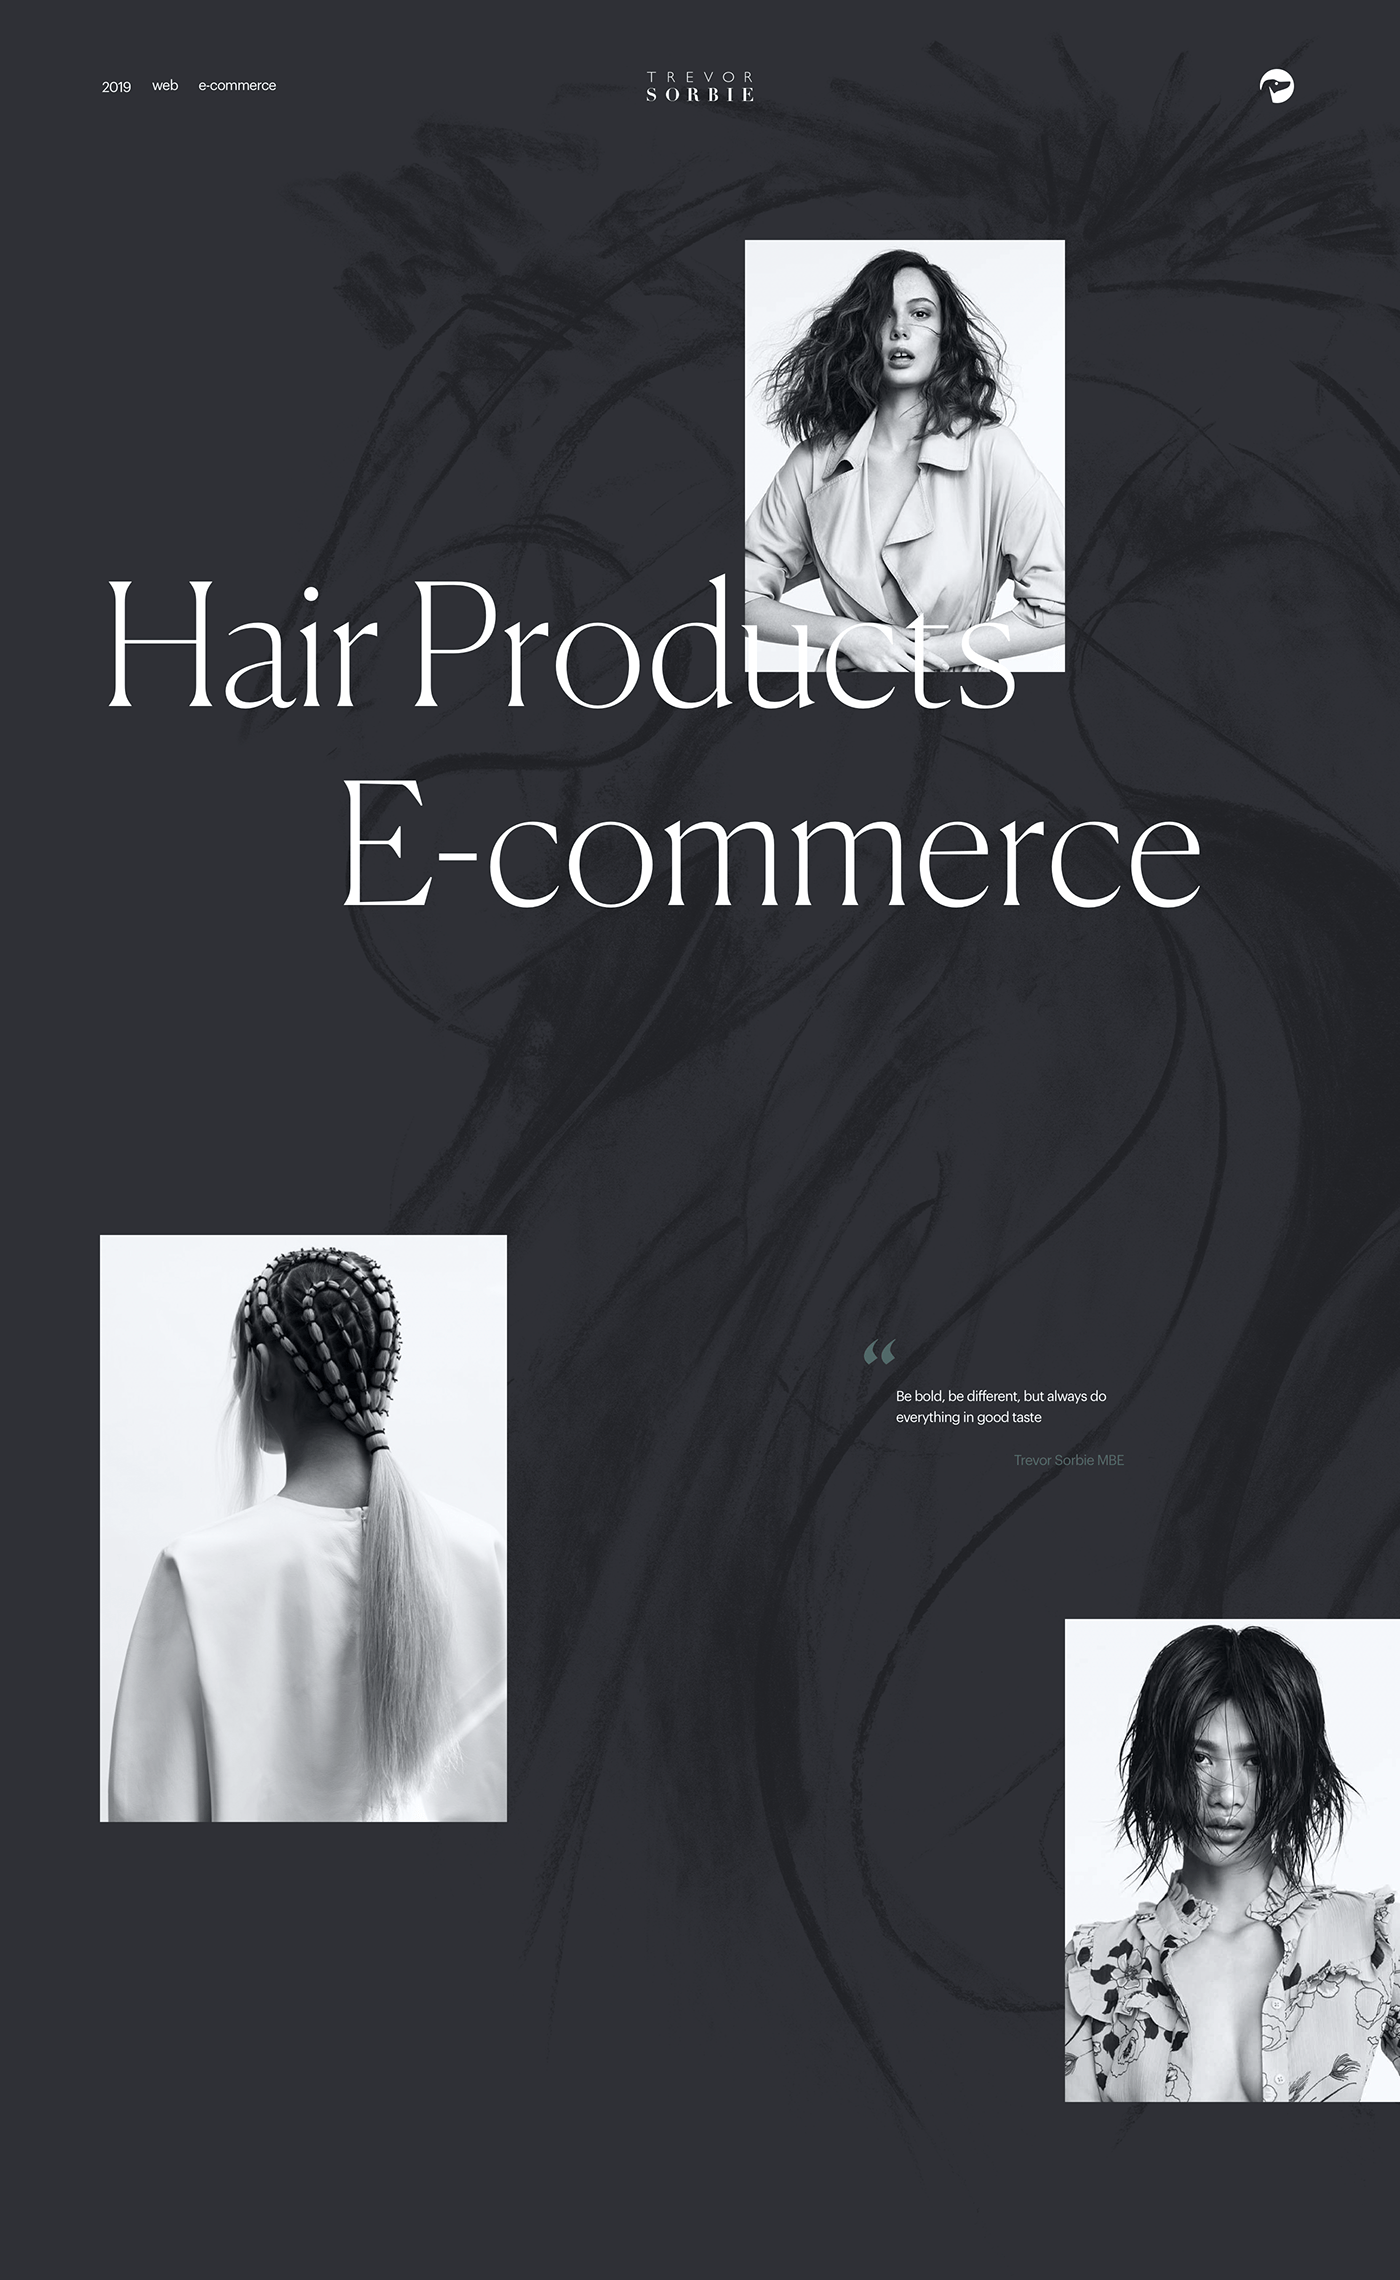 hairdressing Fashion  beauty Webdesign user experience personal website Ecommerce user interface motion design services